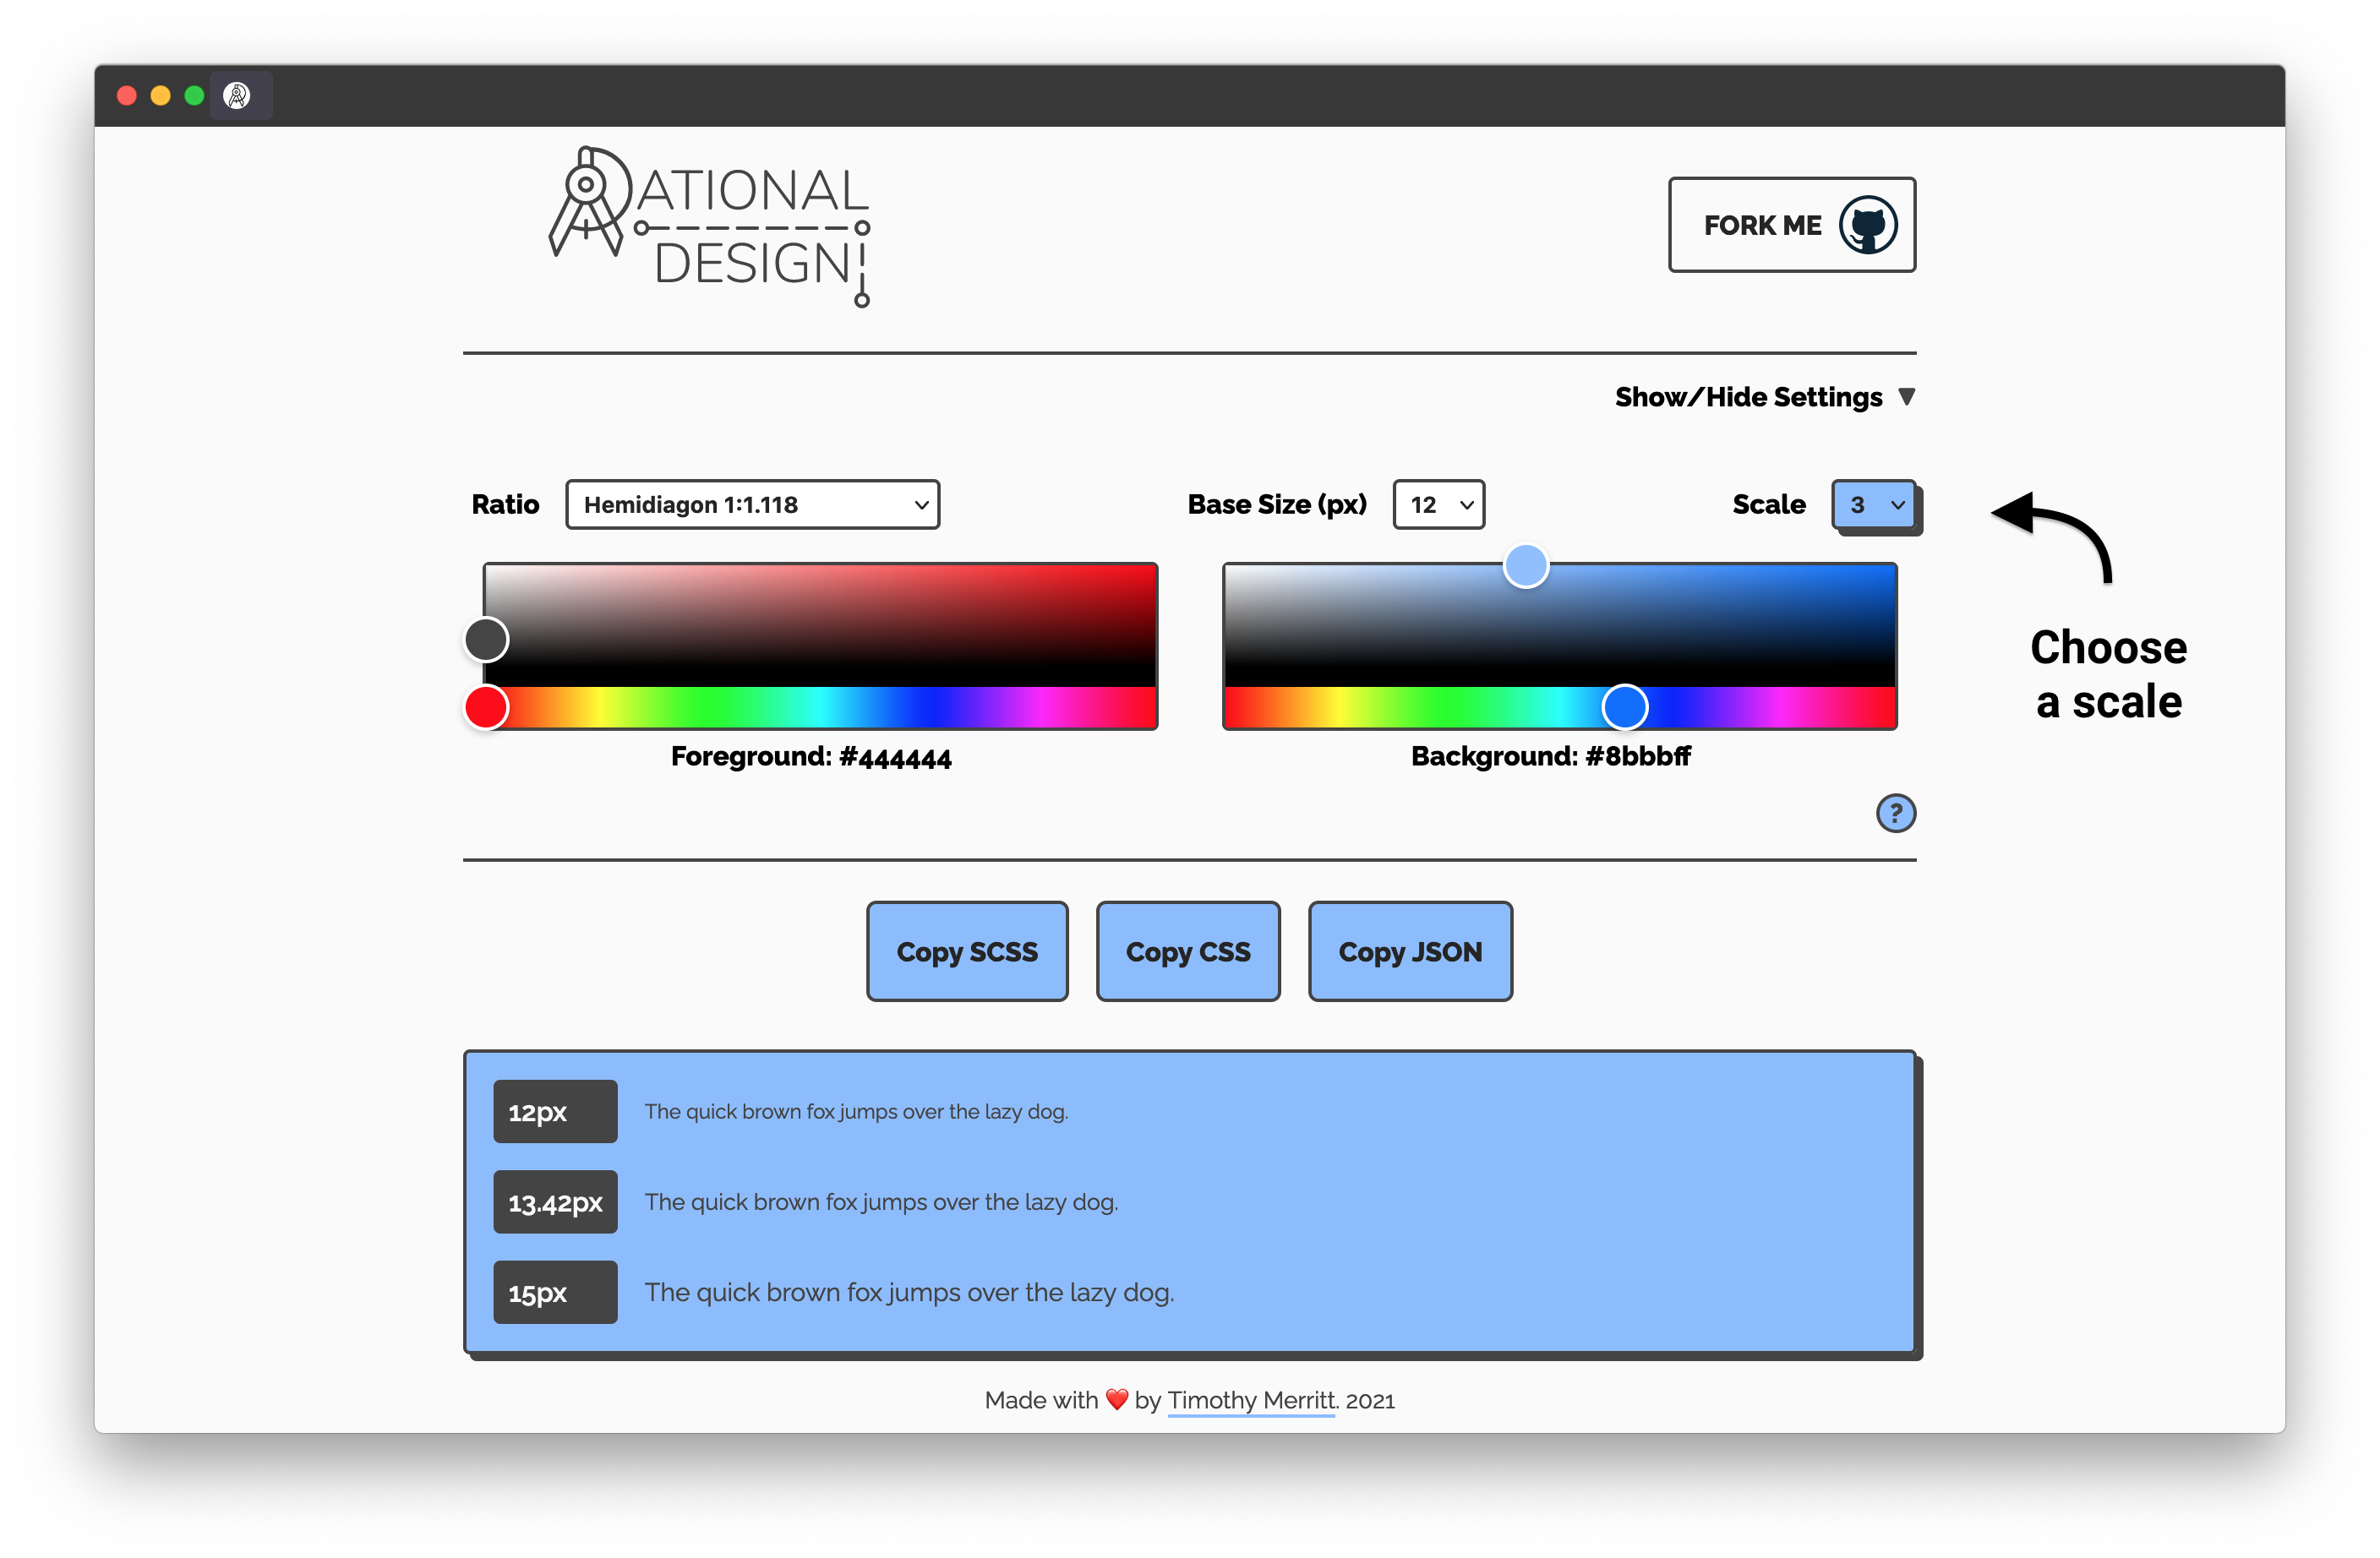 Rational Design - scale